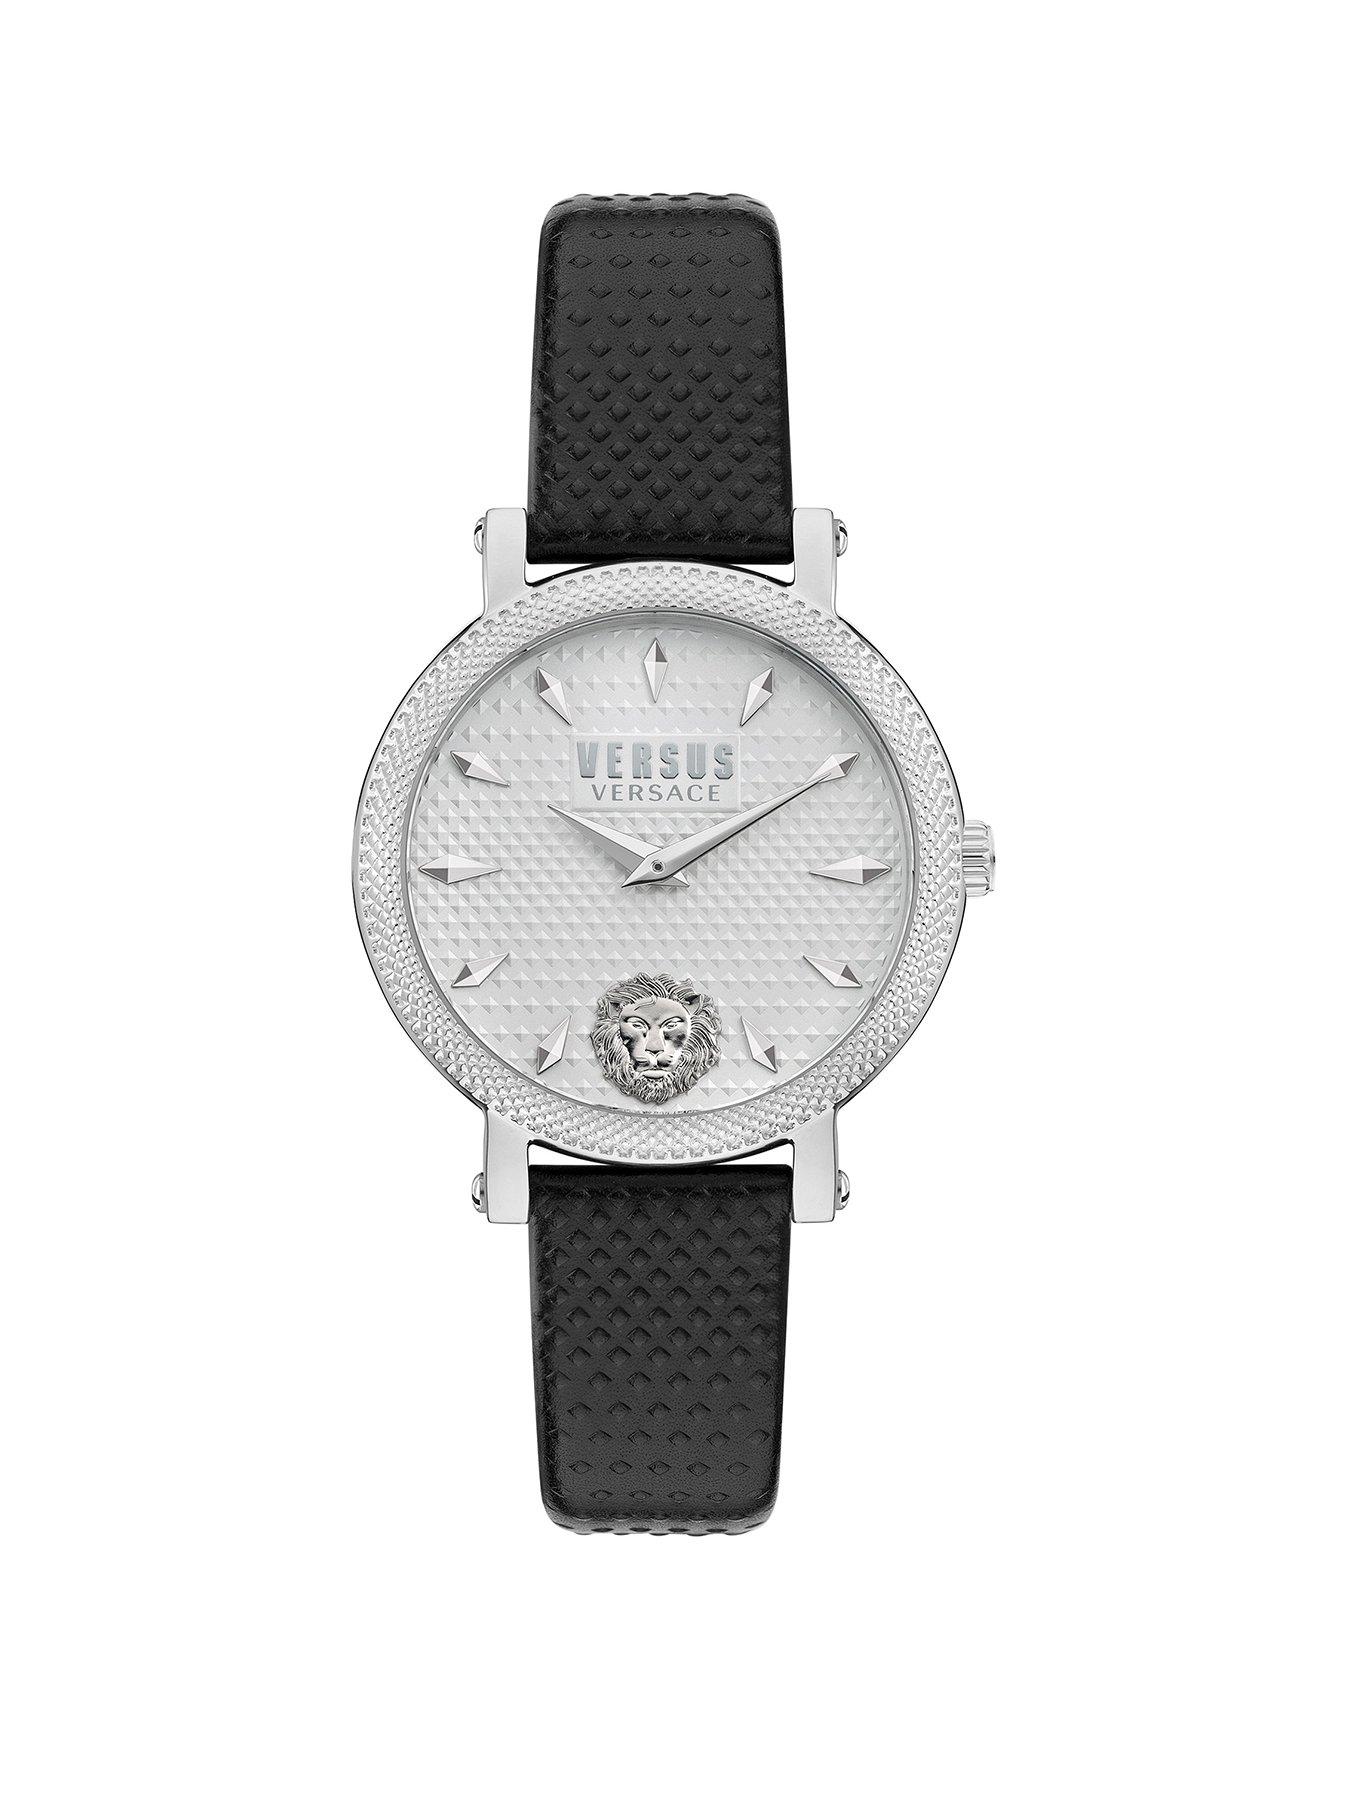  Weho Stainless Steel White Dial Black Strap